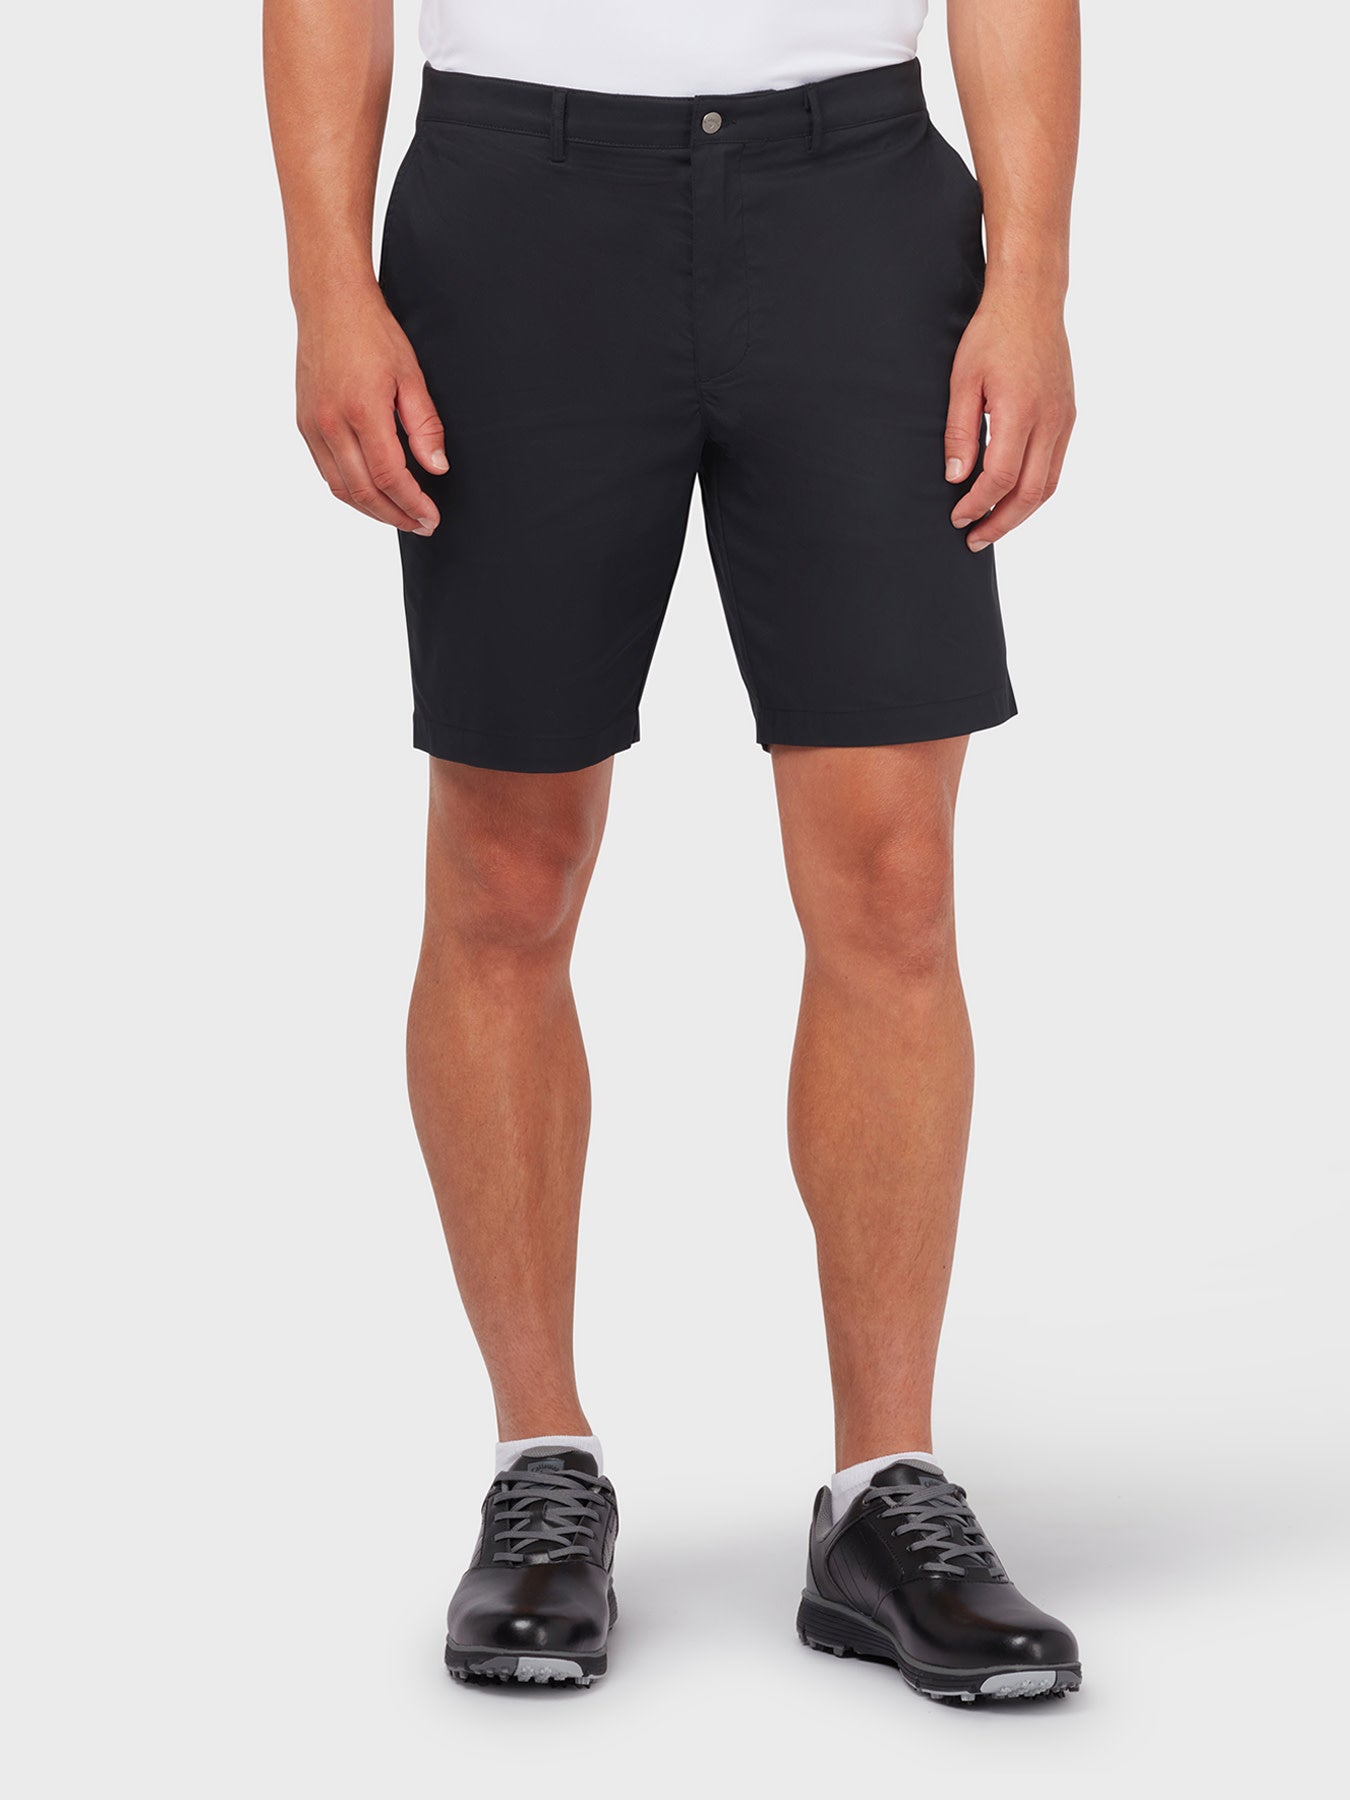 View X Series Flat Fronted Short In Caviar Caviar 32 information